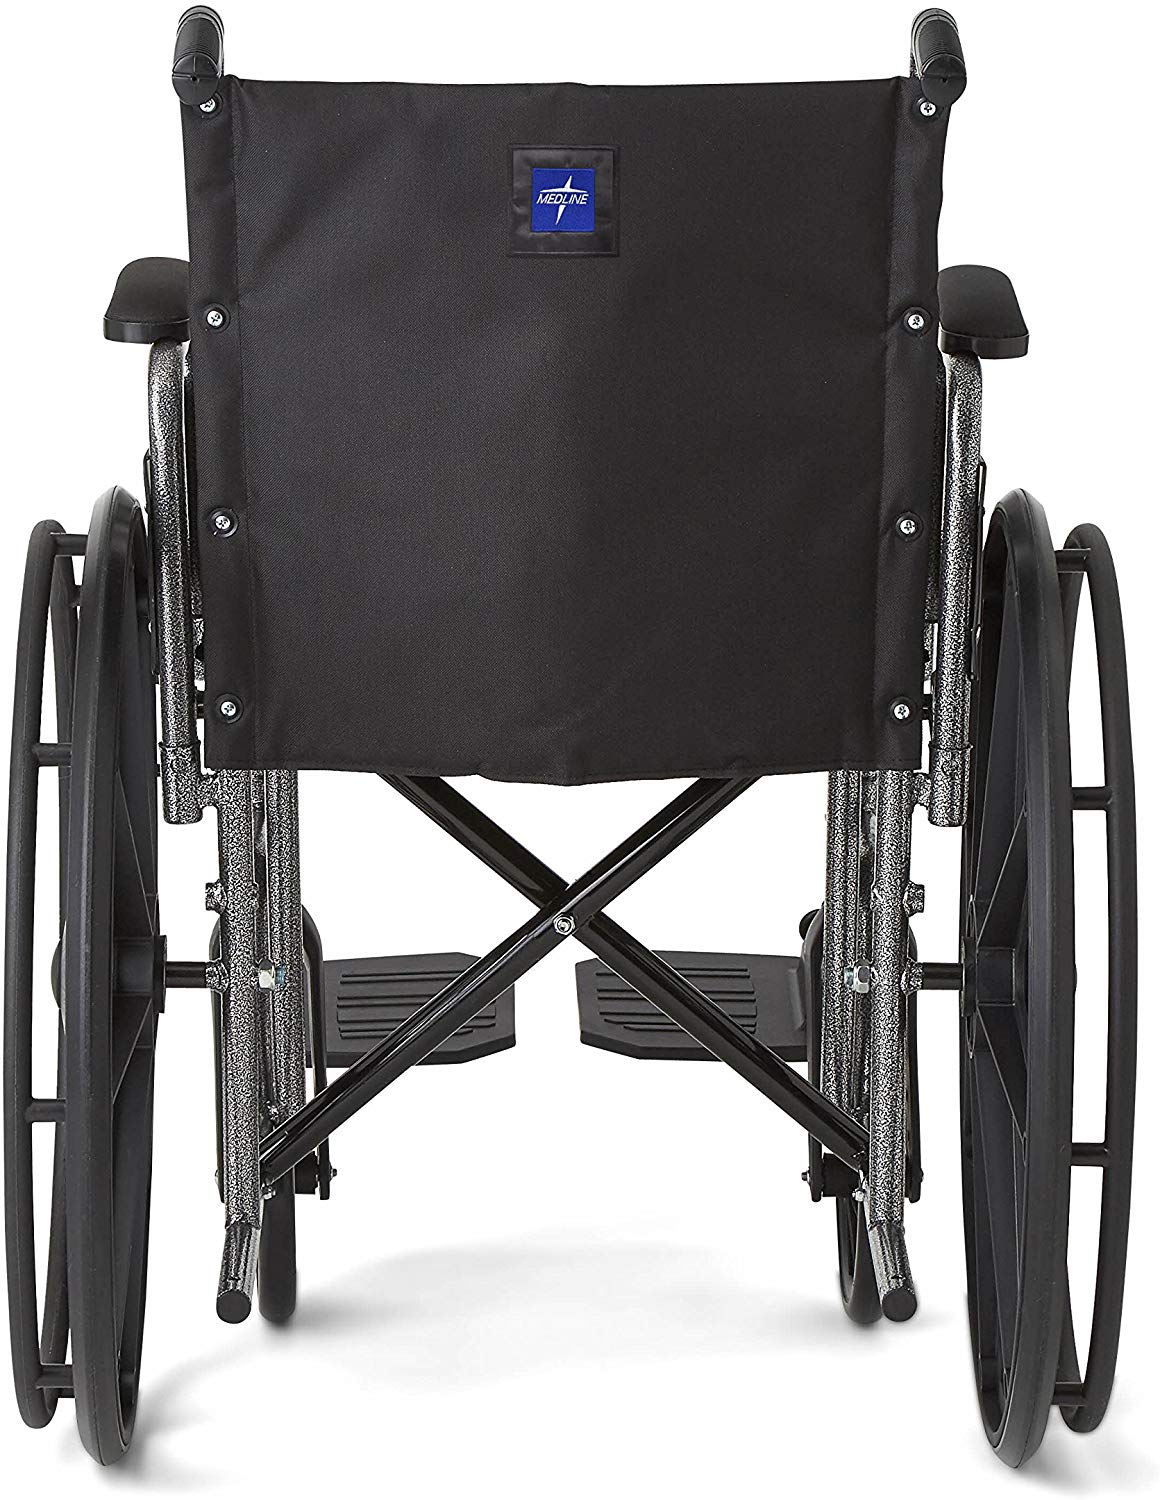 Medline Excel K1 Standard Wheelchair with Desk Length Armrests and Swing away Legrests, Basic Strong and Sturdy, 18" Seat Width - image 4 of 7